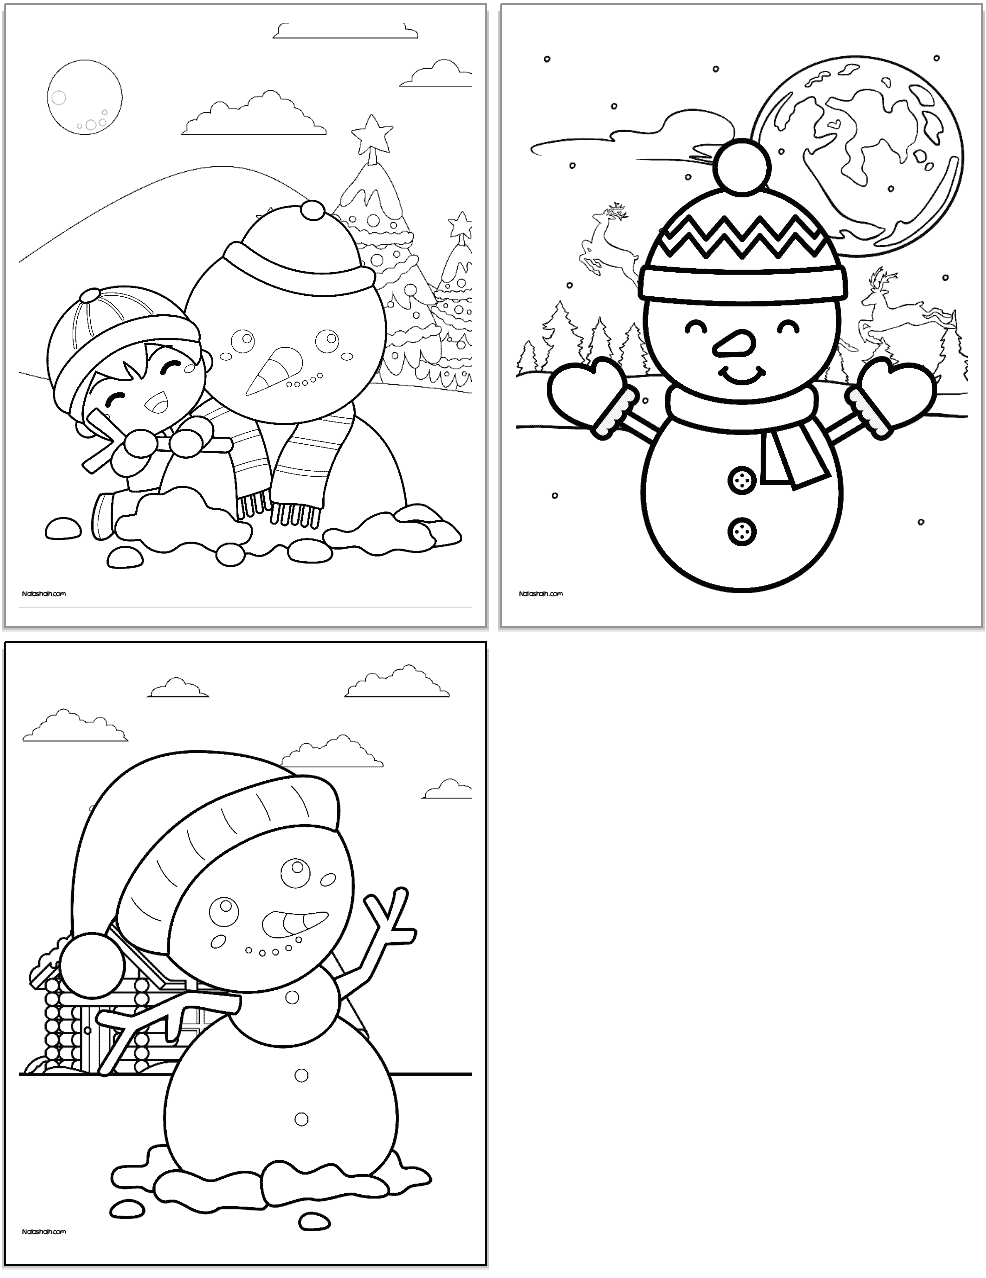 Free Printable Snowman Coloring Pages - The Artisan Life